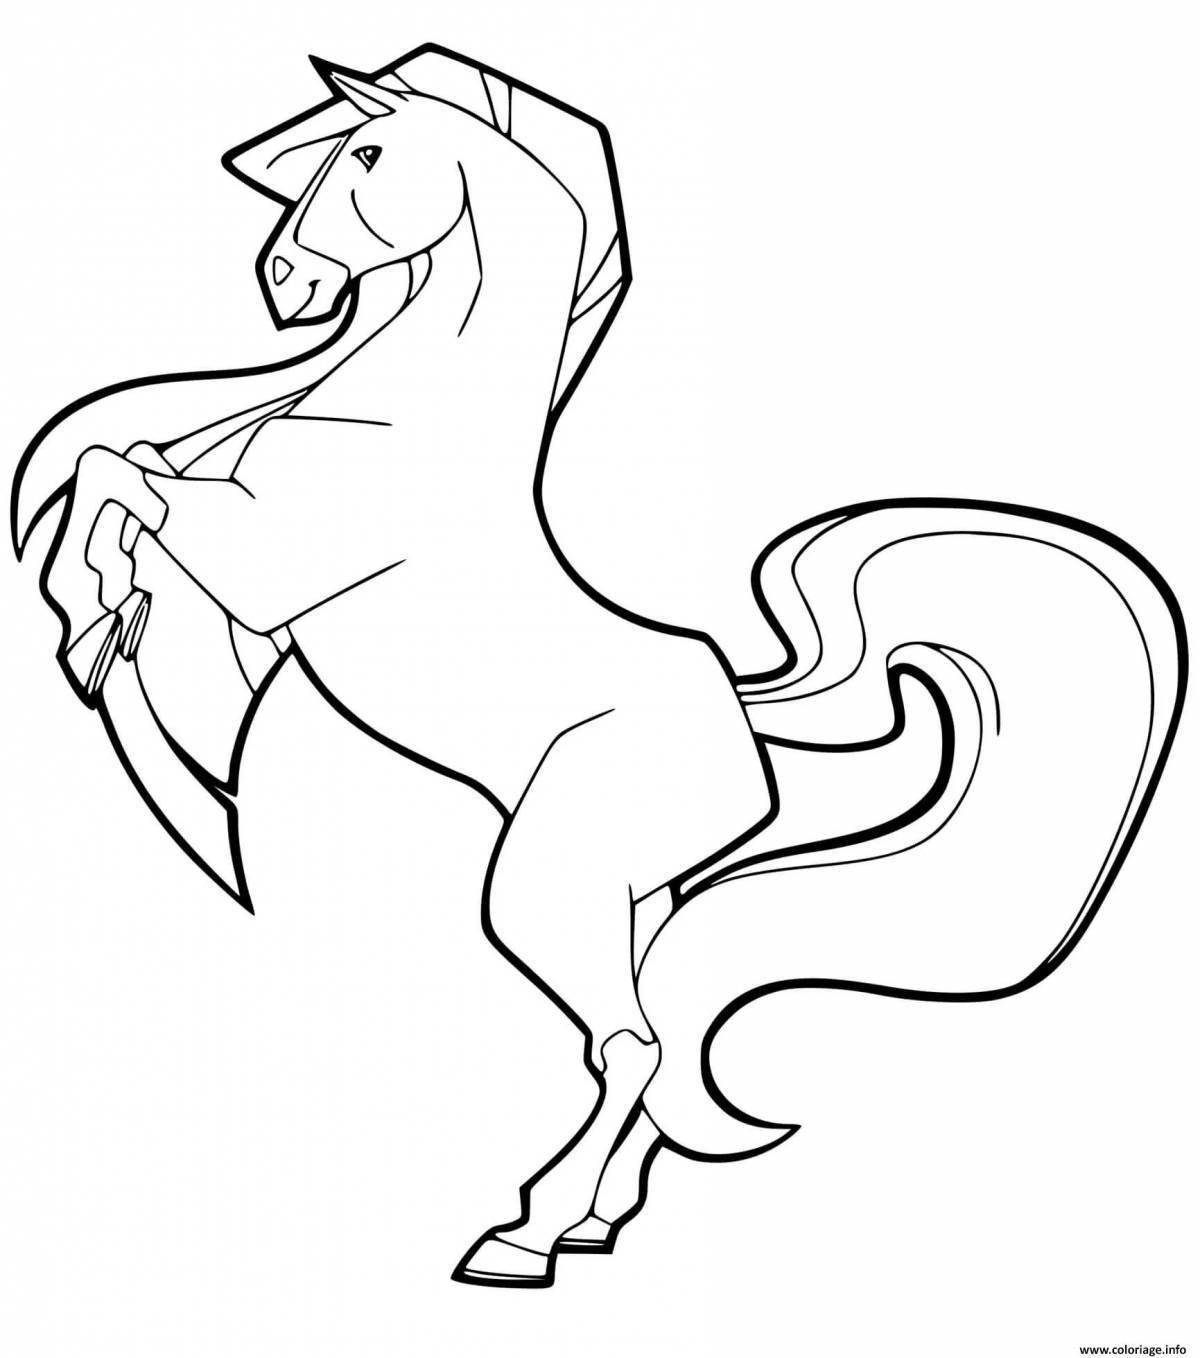 Coloring page majestic land of horses